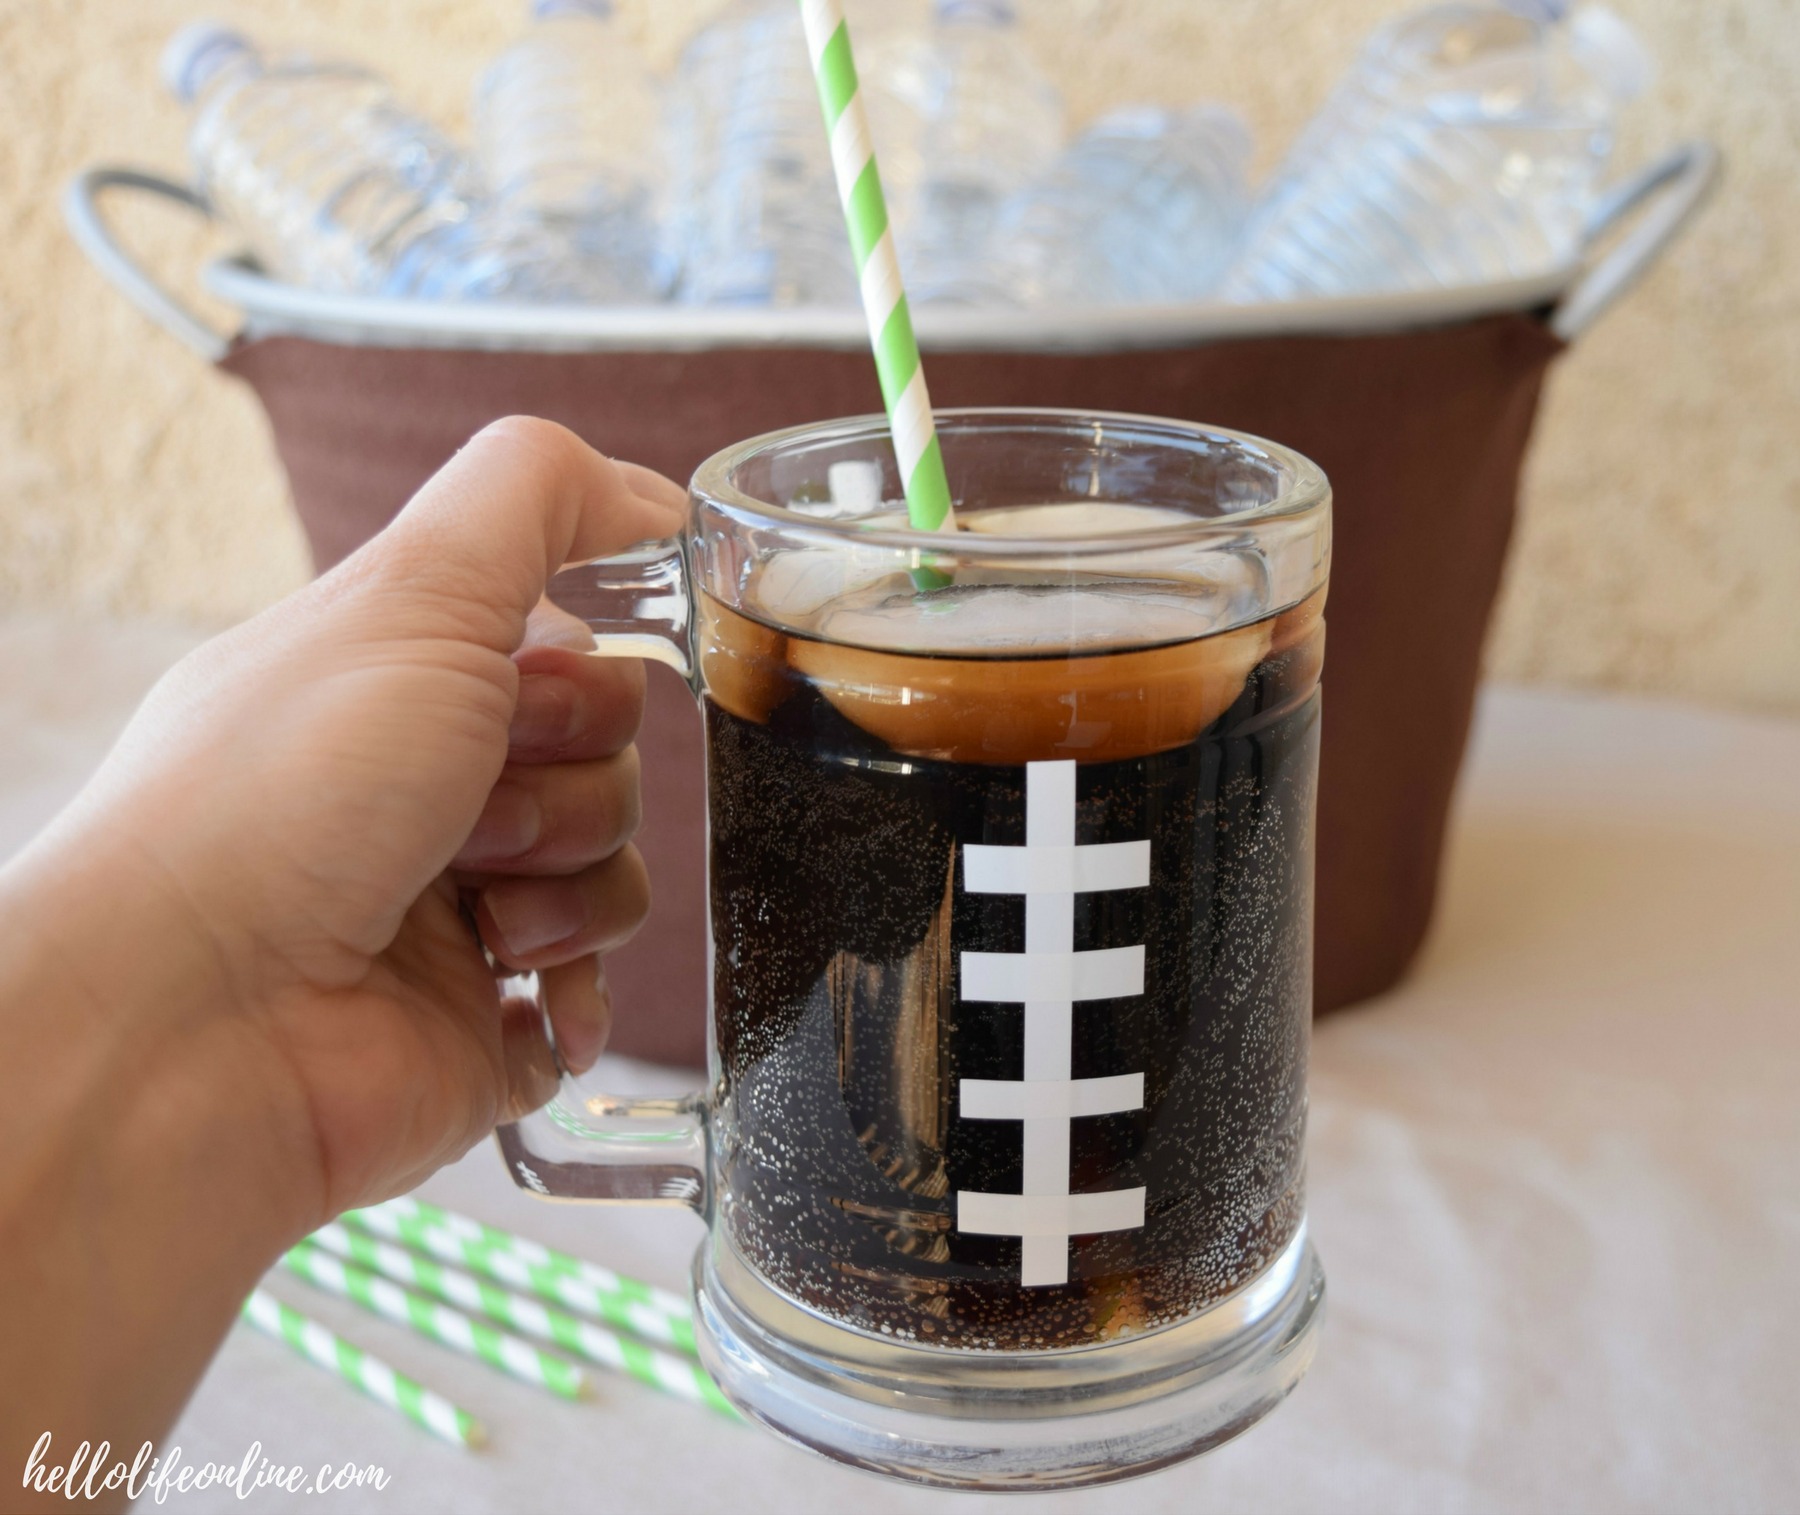 Game Day Party- Learn how to make an easy rustic DIY appetizer stand and beverage bucket, perfect for a Superbowl party or any other occasion!